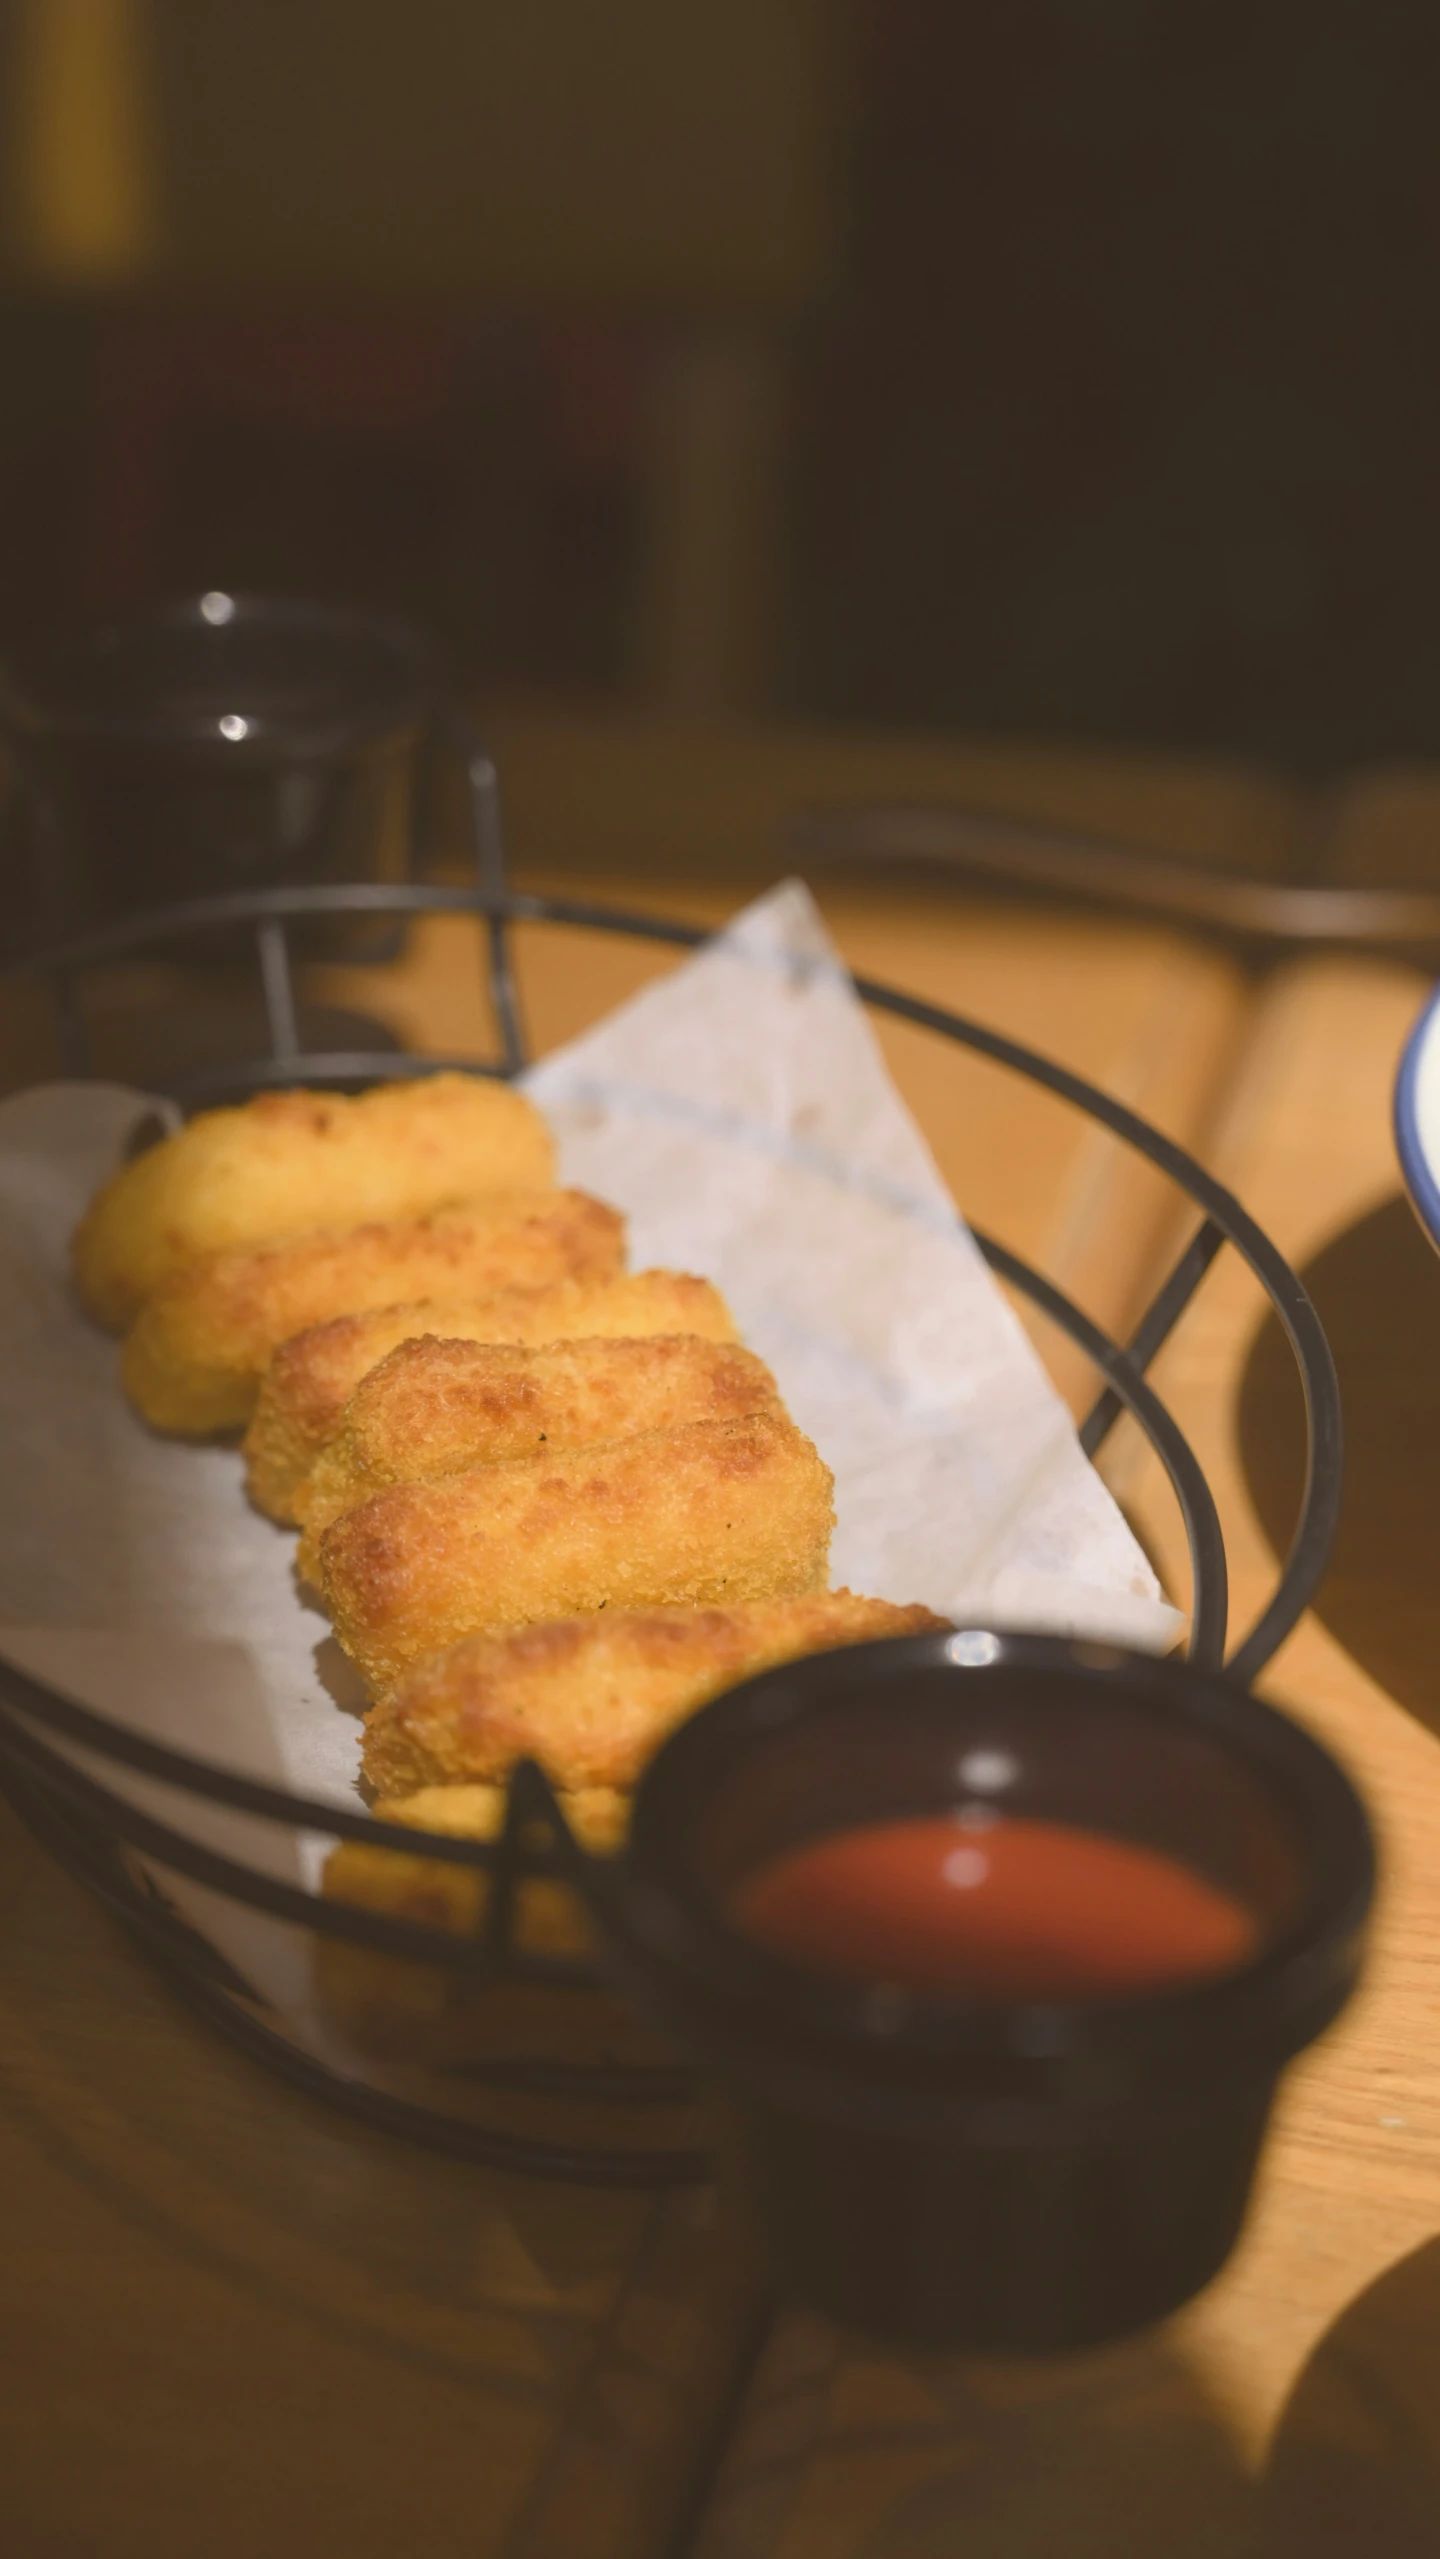 fried bread sticks with dipping sauce on a plate